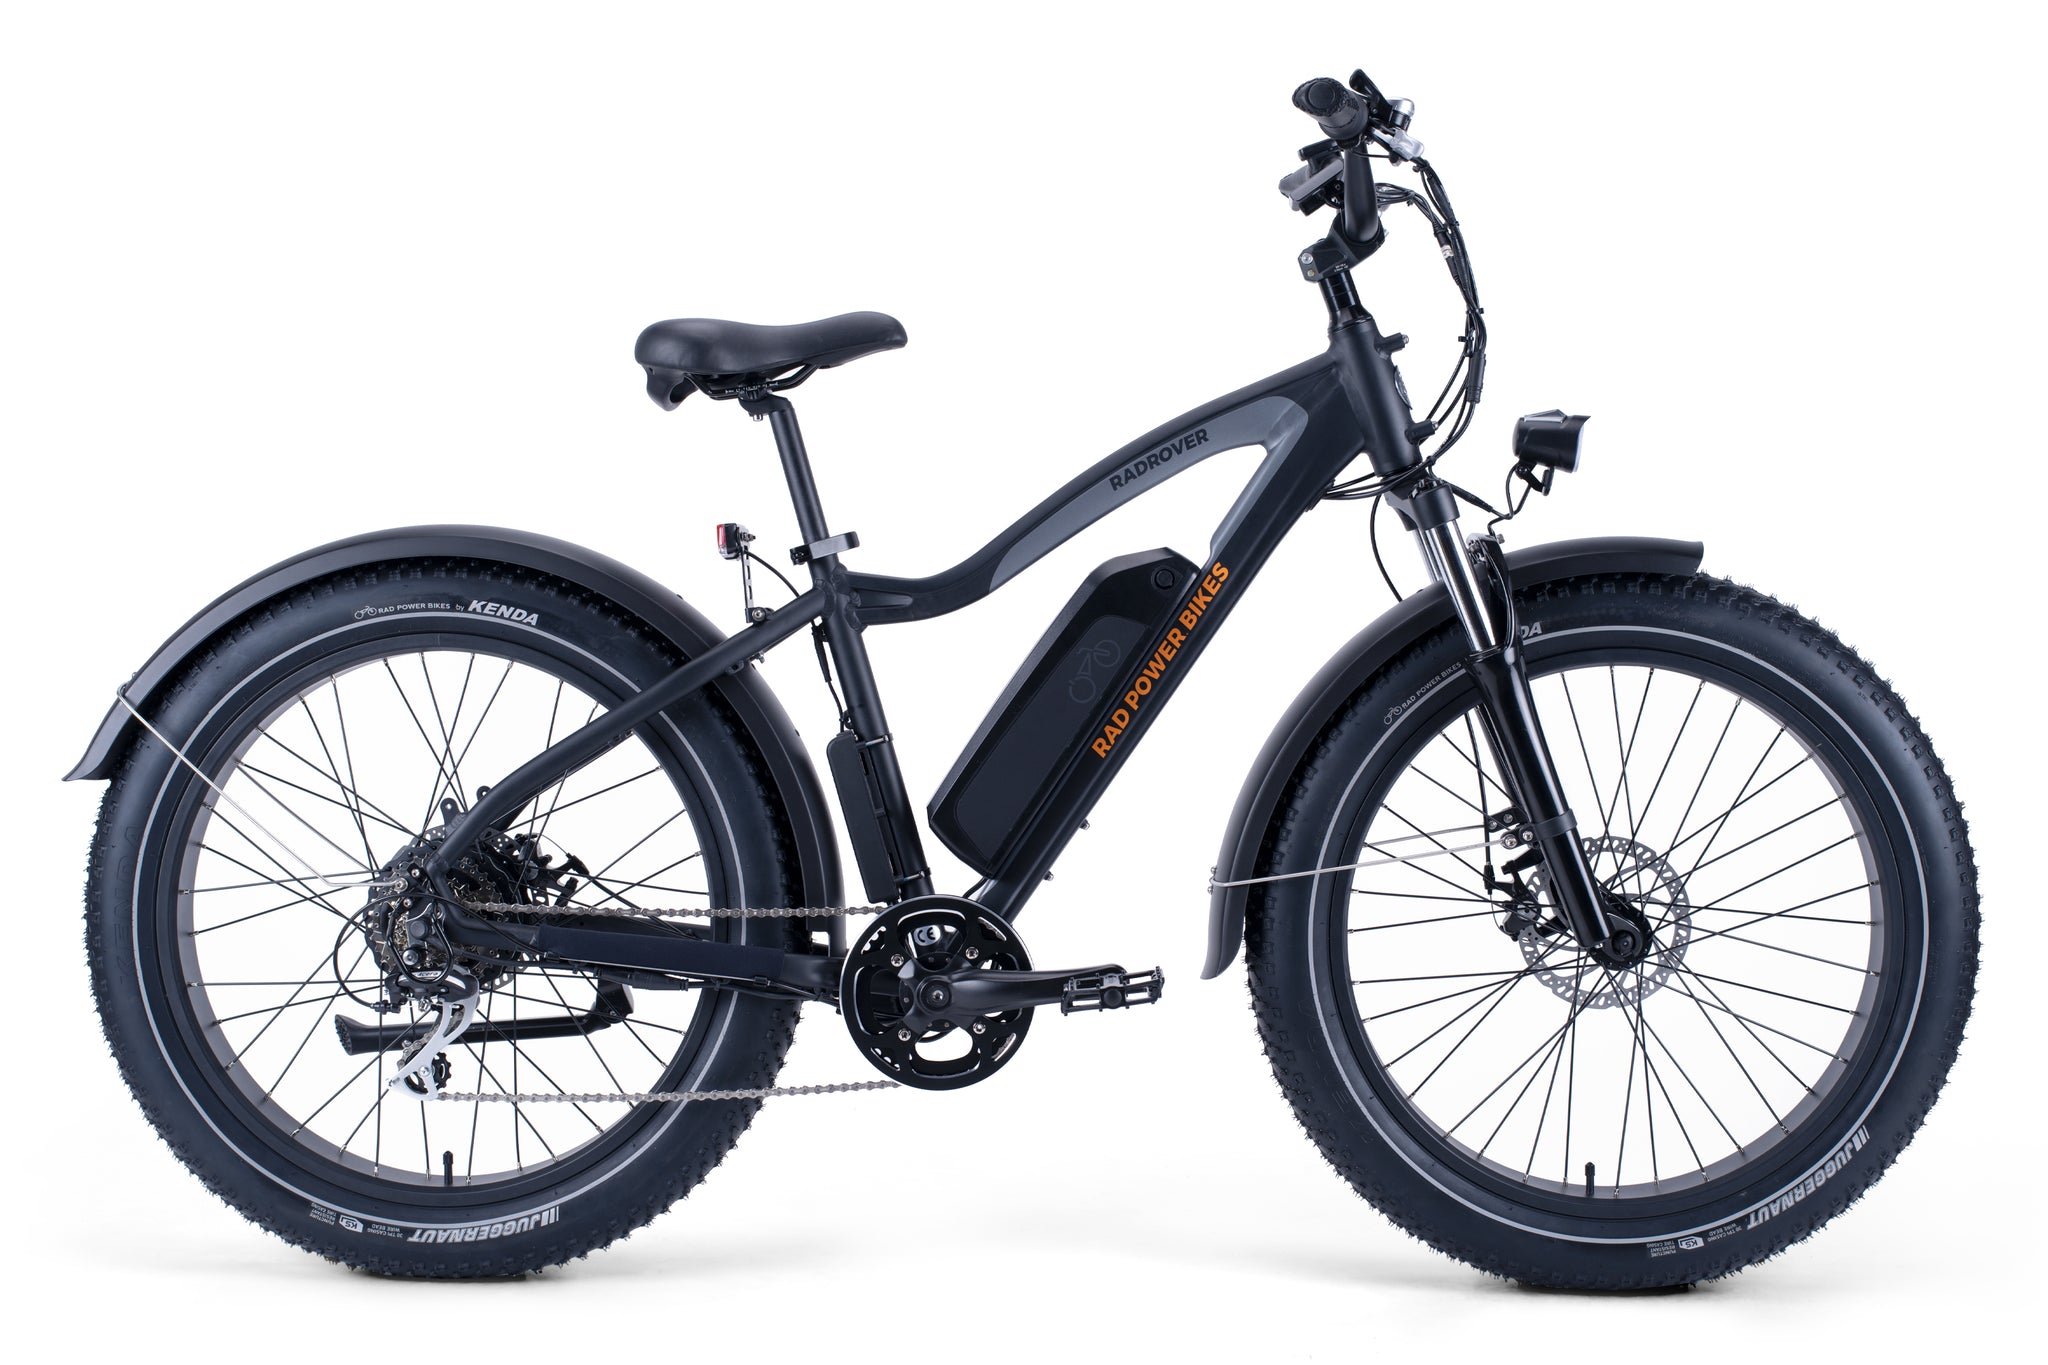 twist and go electric bikes for sale